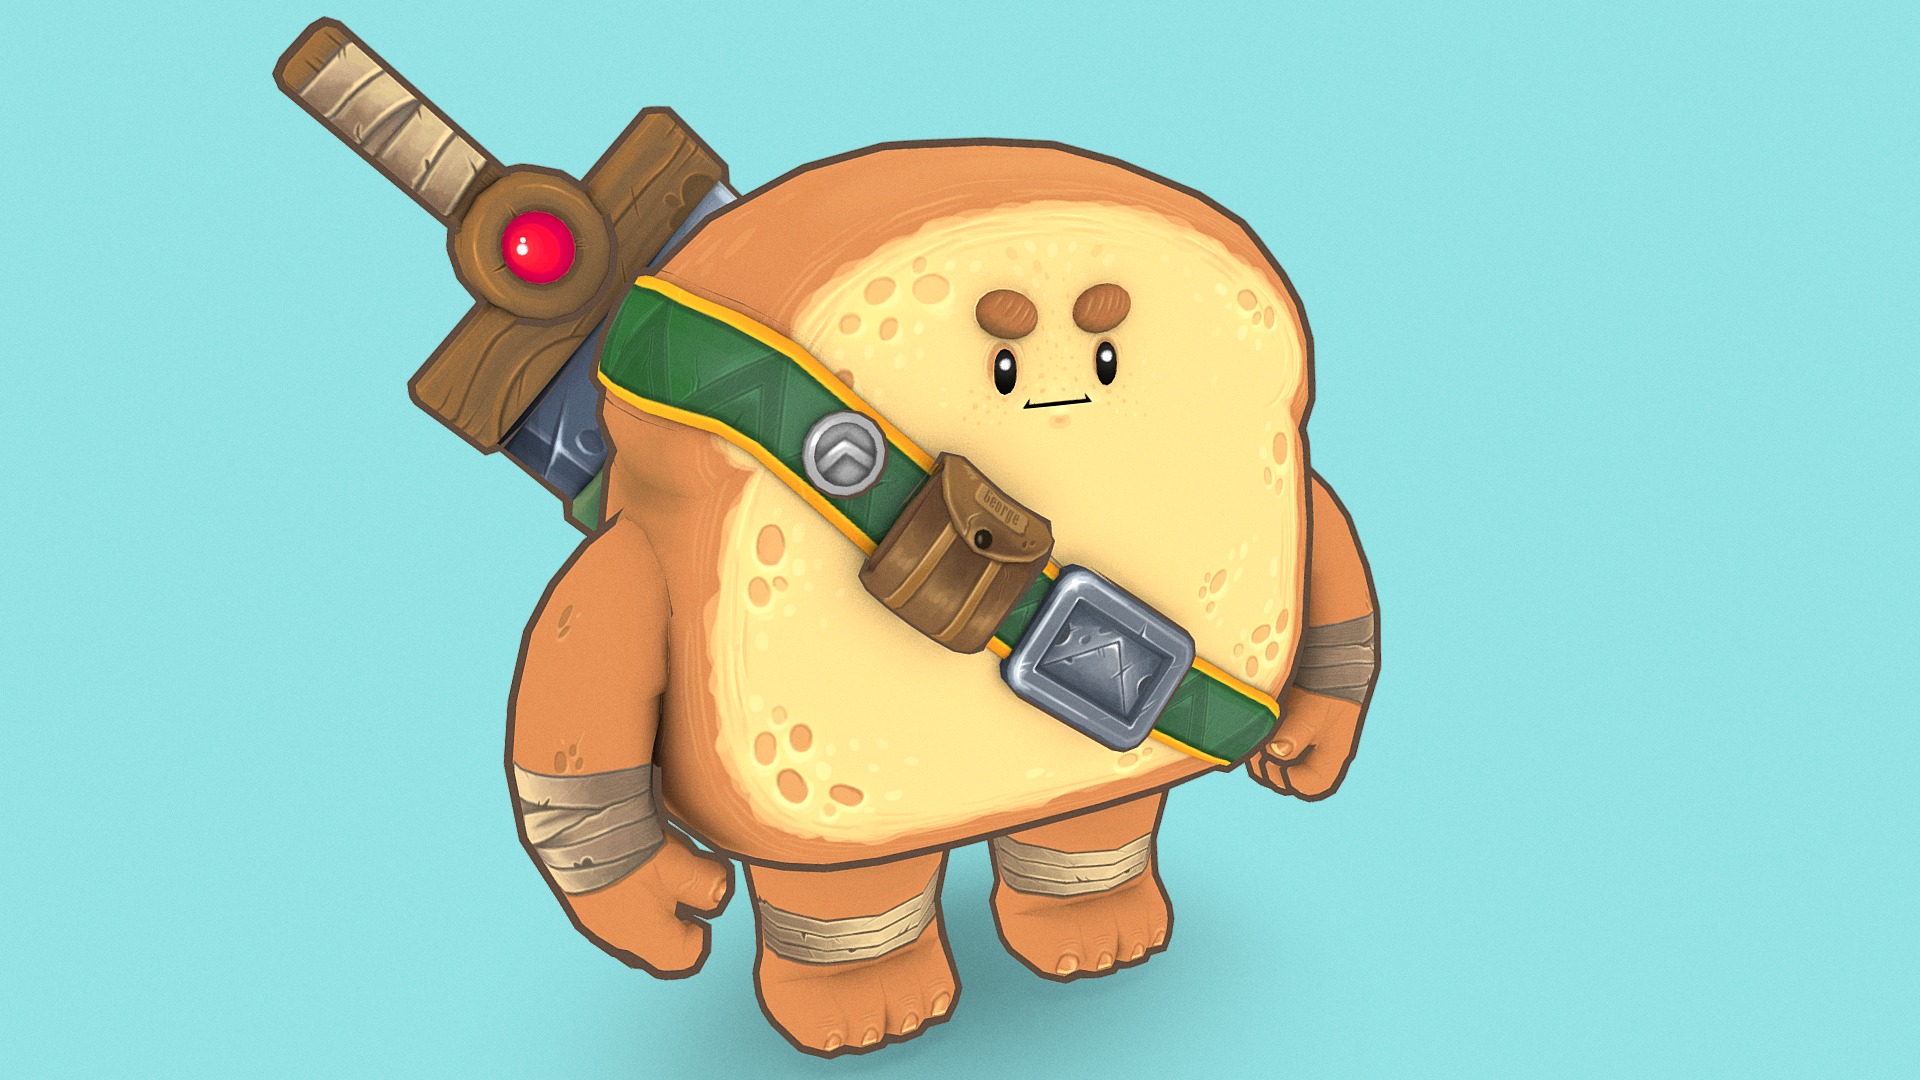 A while ago I found a concept of this little bread dude on art station and couldnt help but make him in 3D :)

Hope you linke him, I used Maya, Photoshop and 3D Coat.

Here is a link to the orignal artowork https://www.artstation.com/artwork/49ZmW - Bread Warrior - 3D model by AliceDruzga 3d model